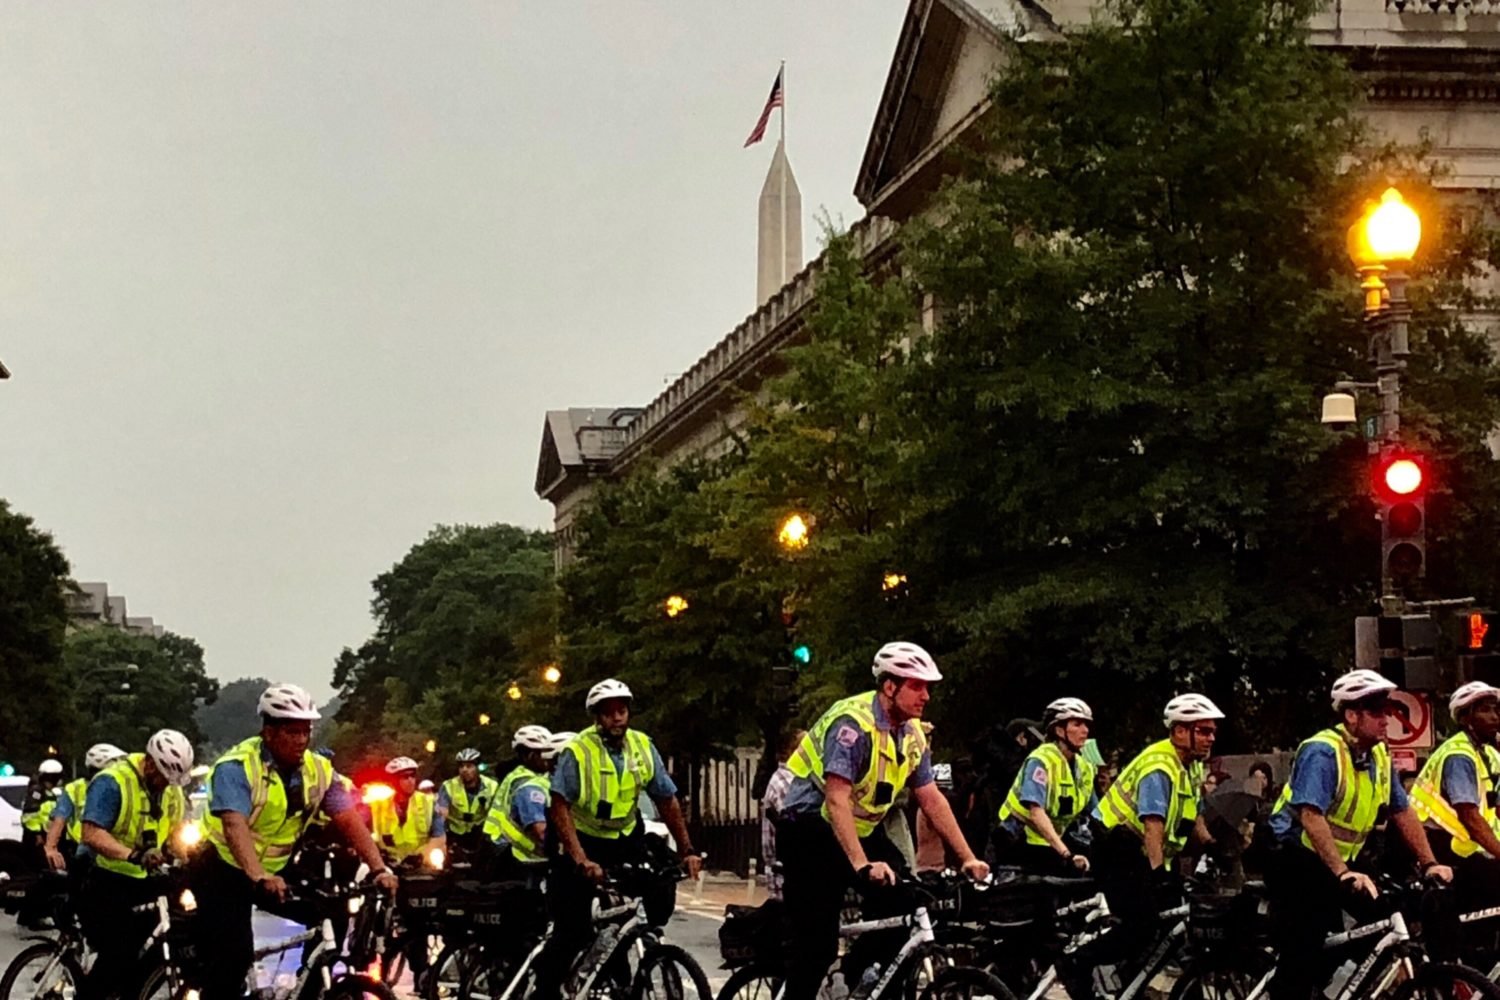 DC Police Unite the Right 2 Rally